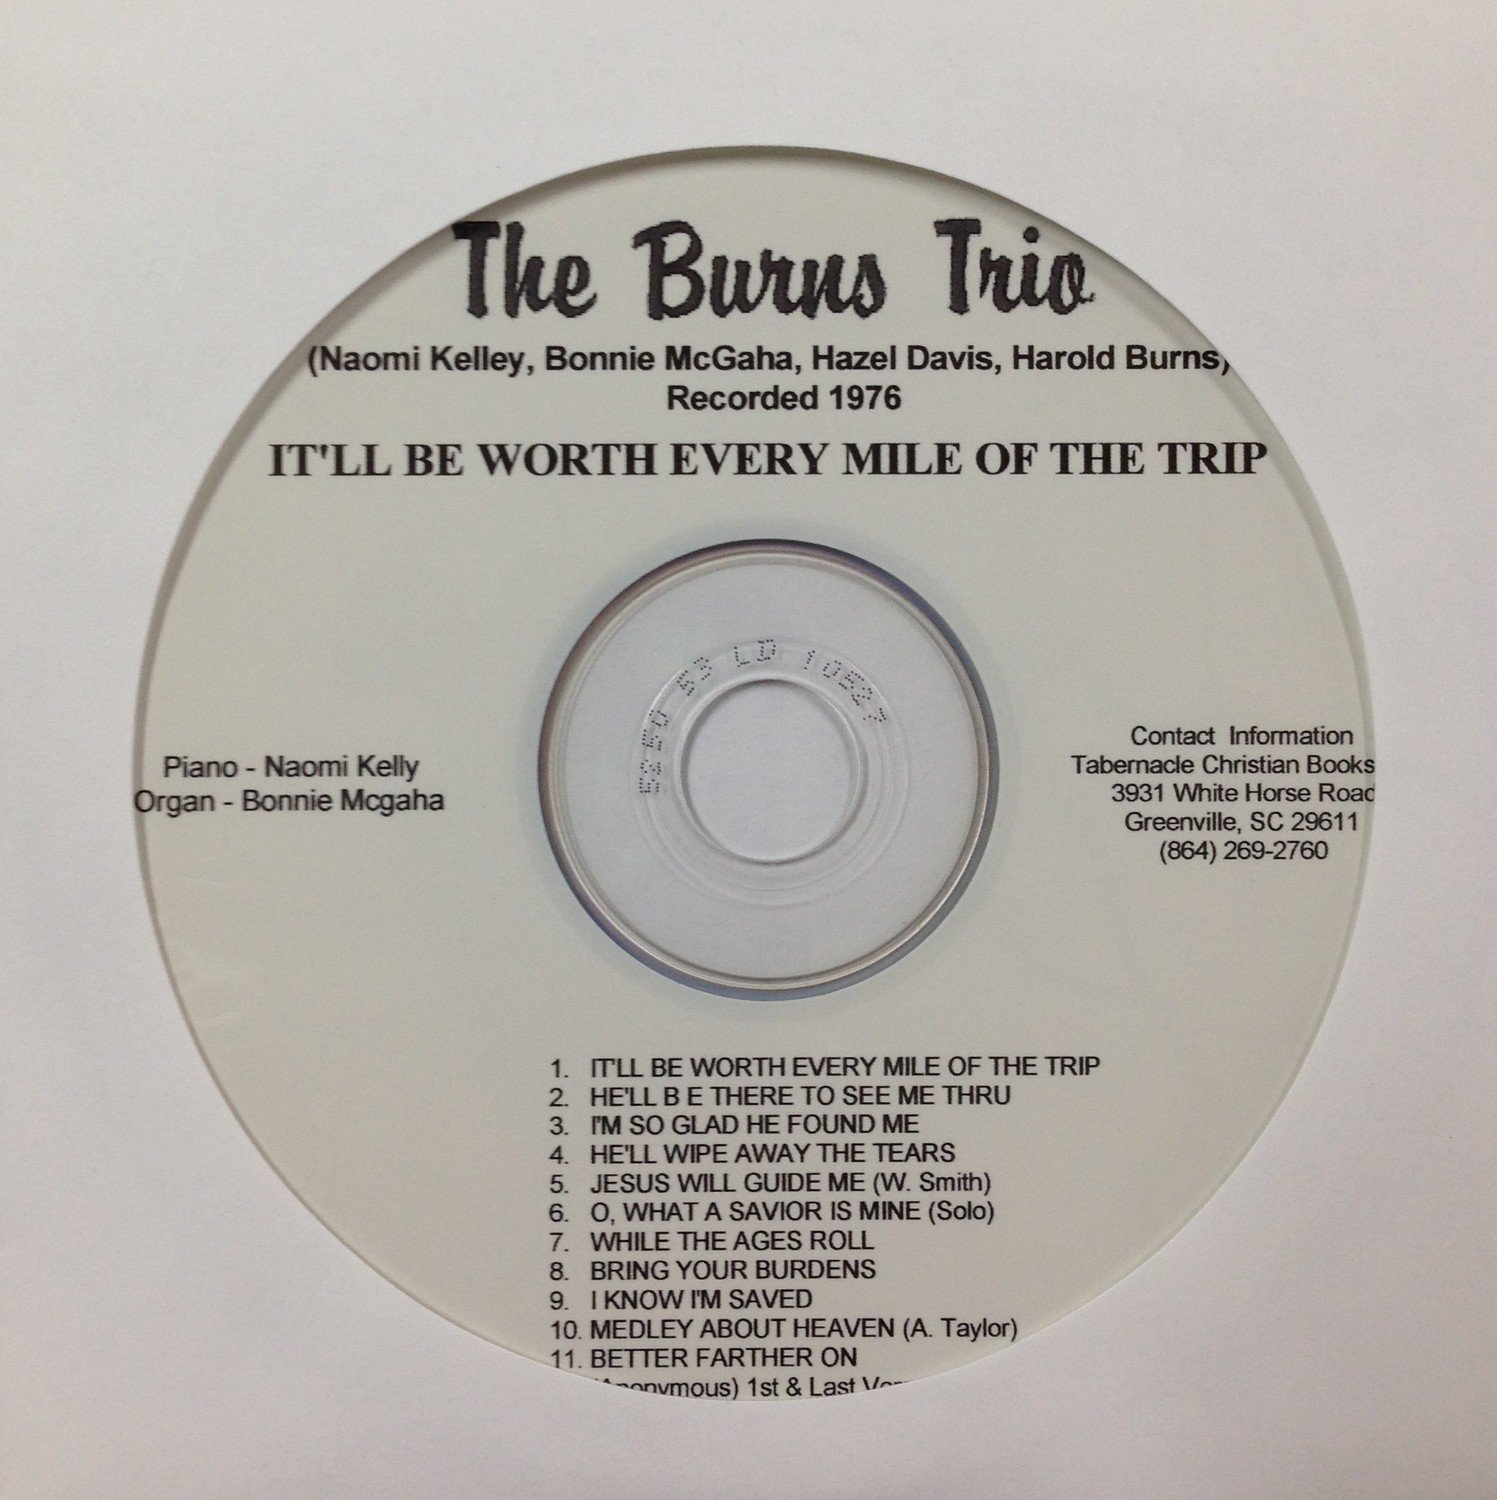 The Burns Trio:  It'll Be Worth Every Mile of the Trip  CD